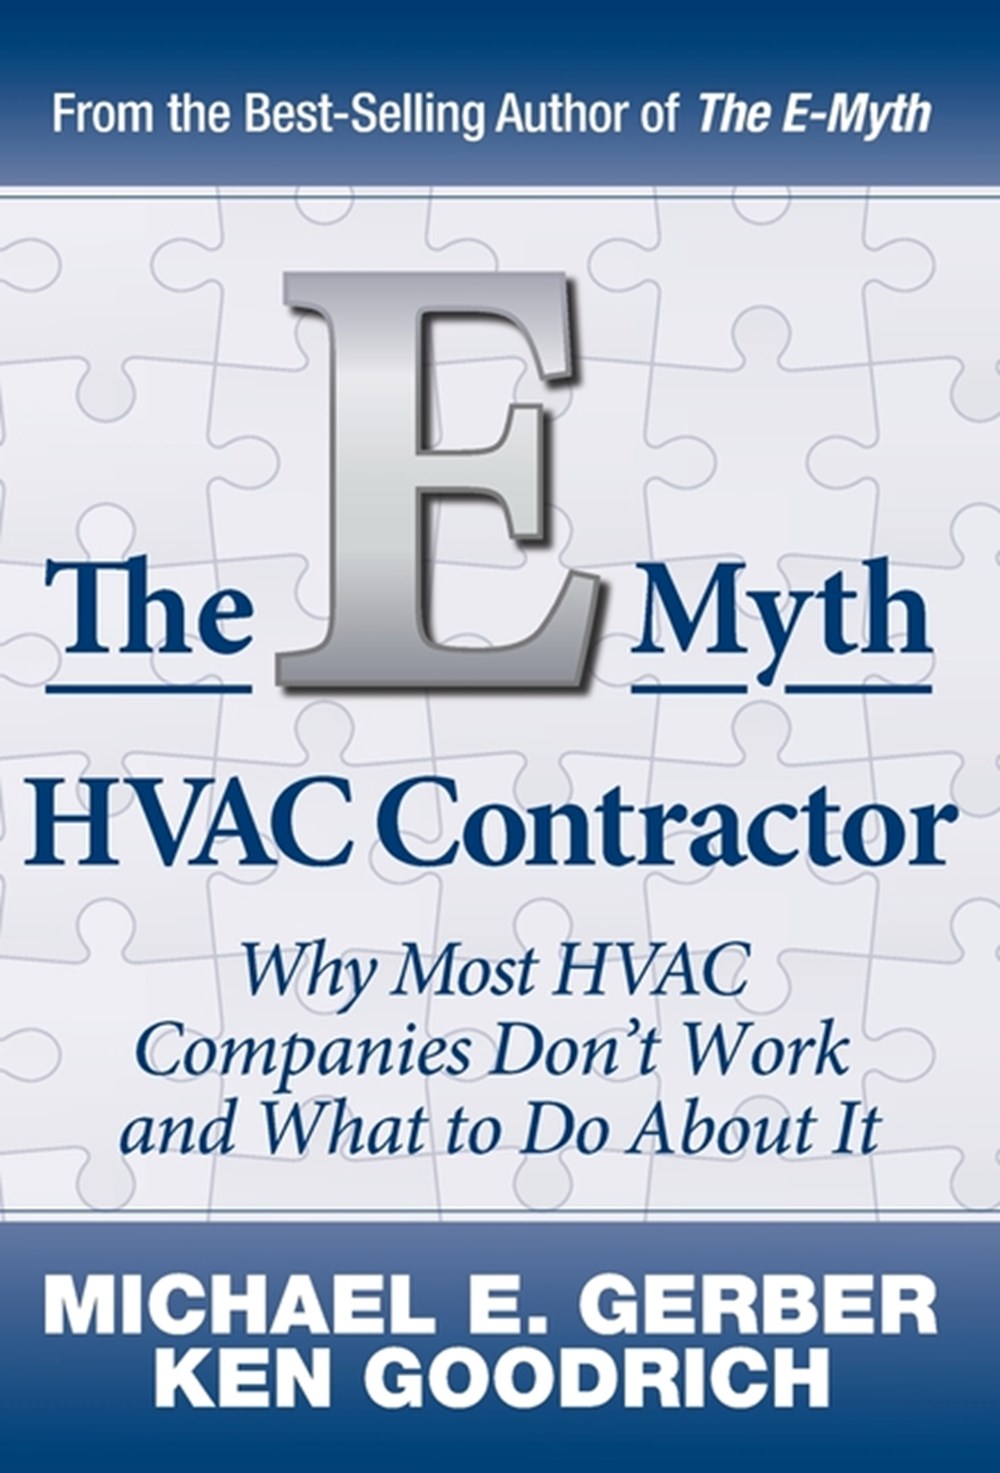 E-Myth HVAC Contractor: Why Most HVAC Companies Don't Work and What to Do About It